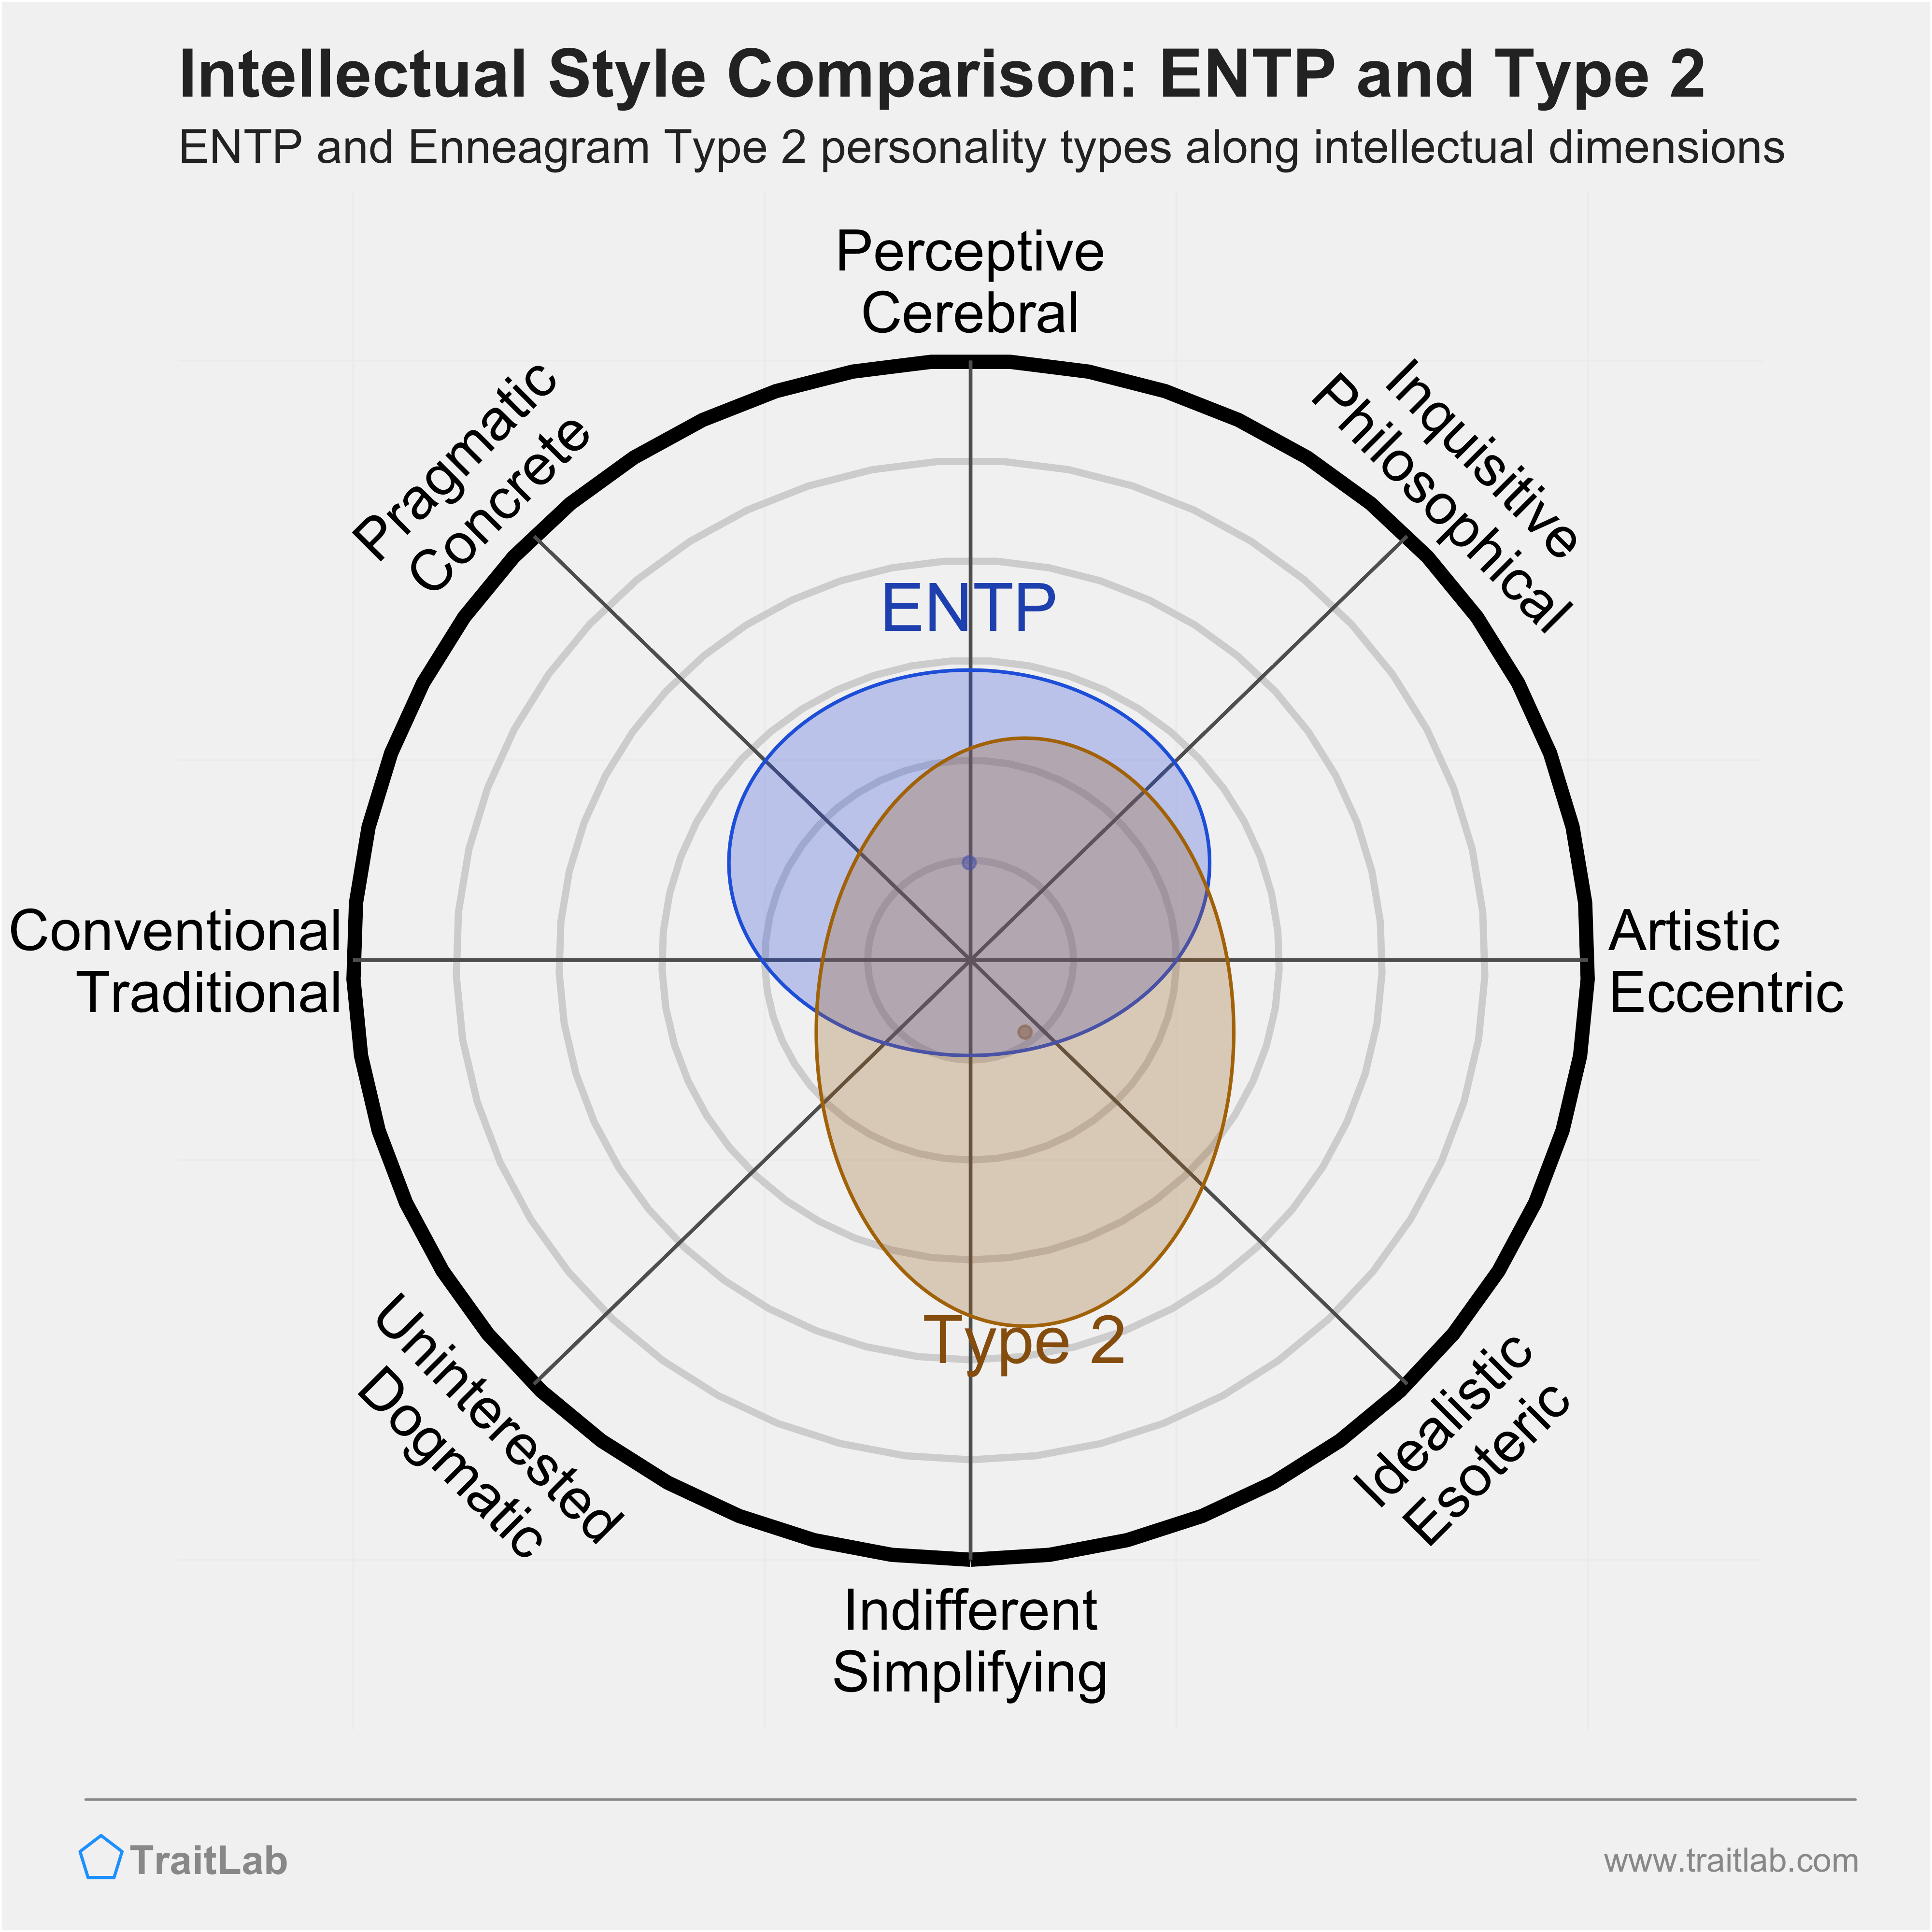 ENTP and Type 2 comparison across intellectual dimensions